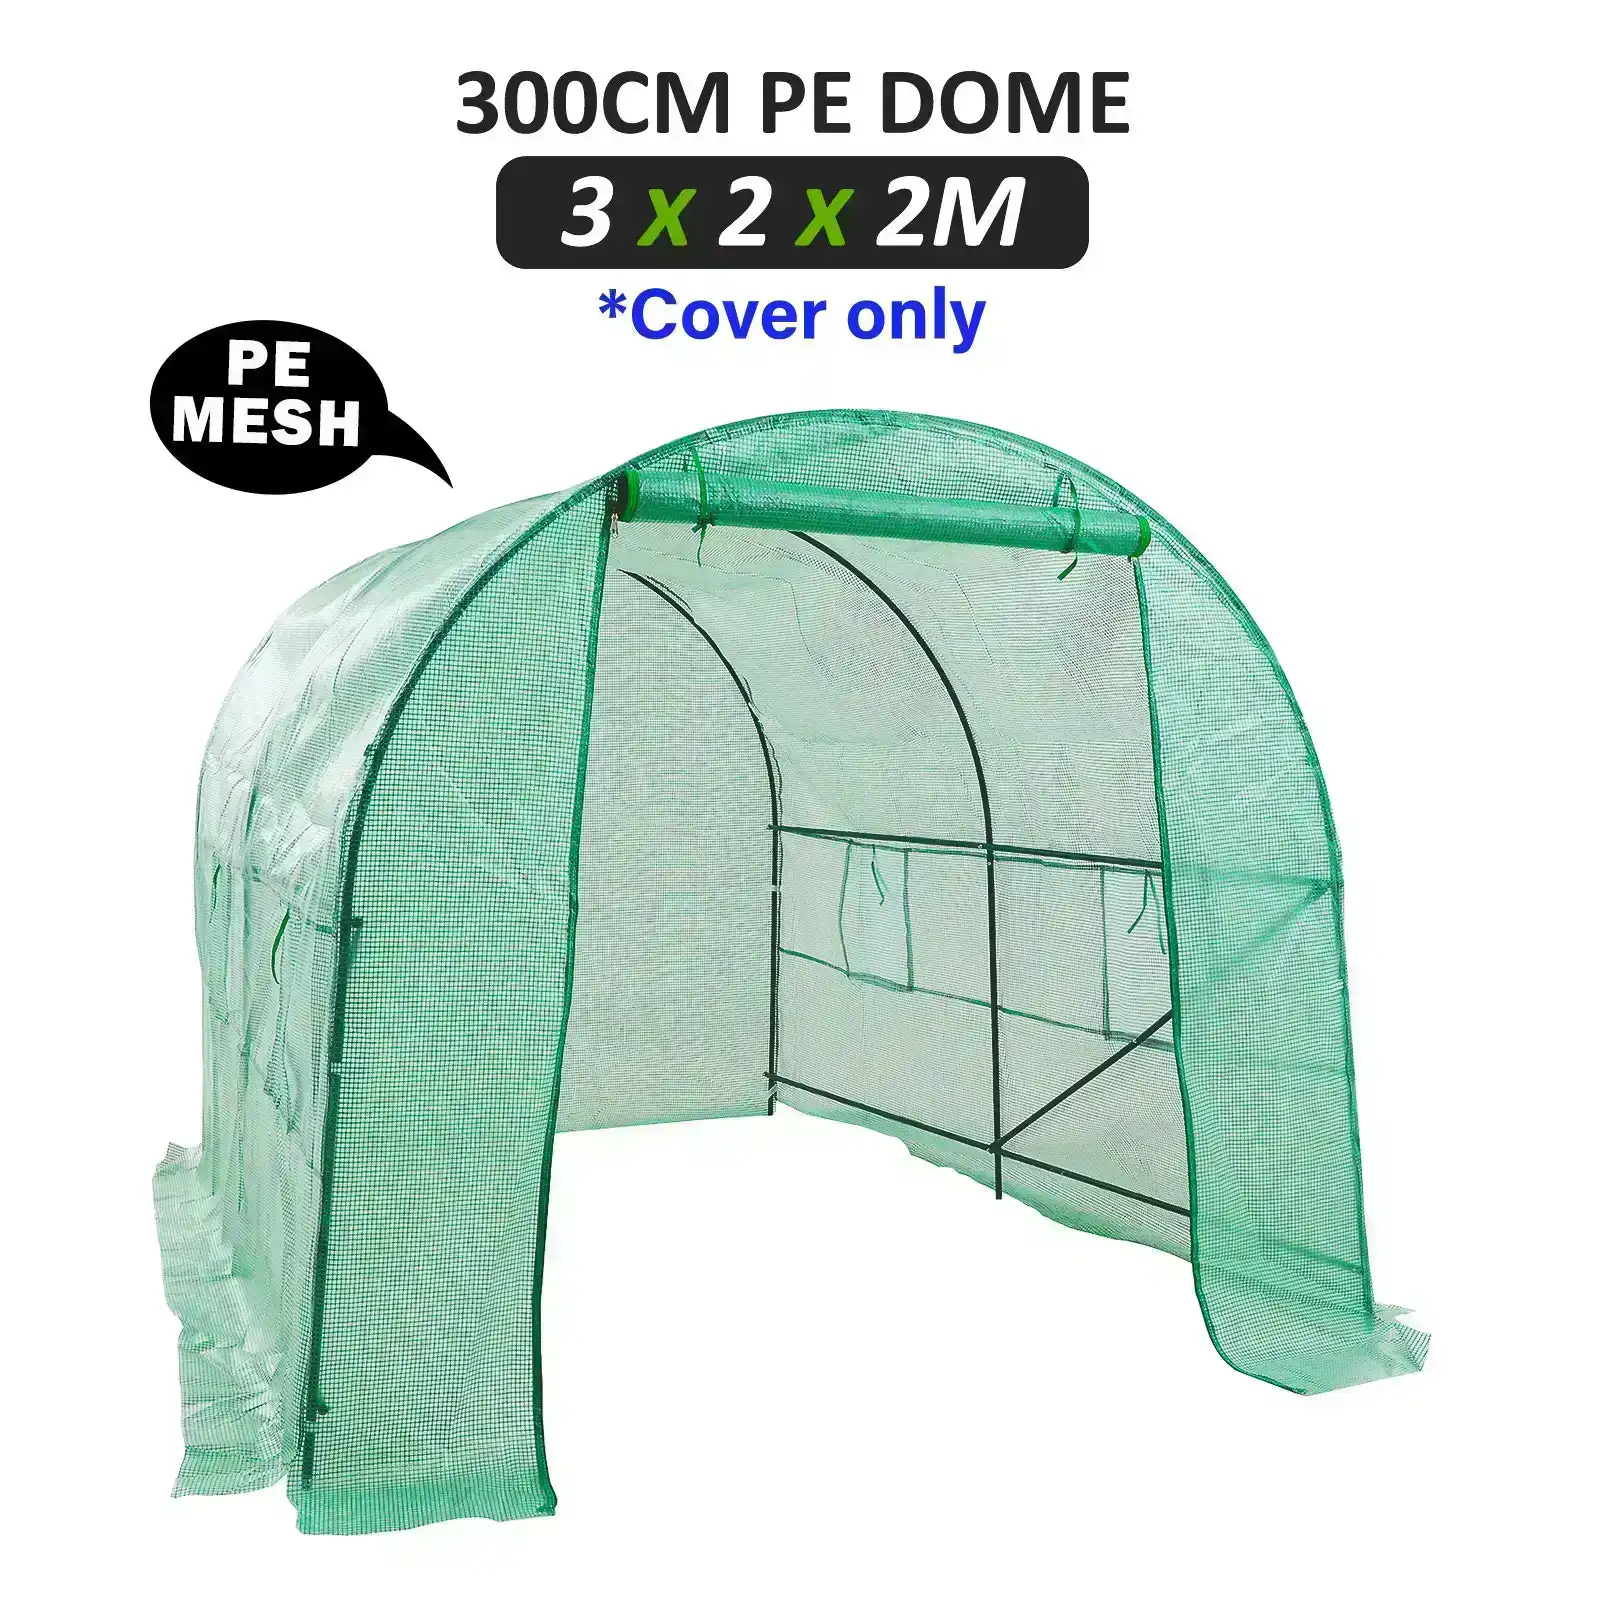 300cm Greenhouse PE Dome Tunnel Cover Only - GREEN